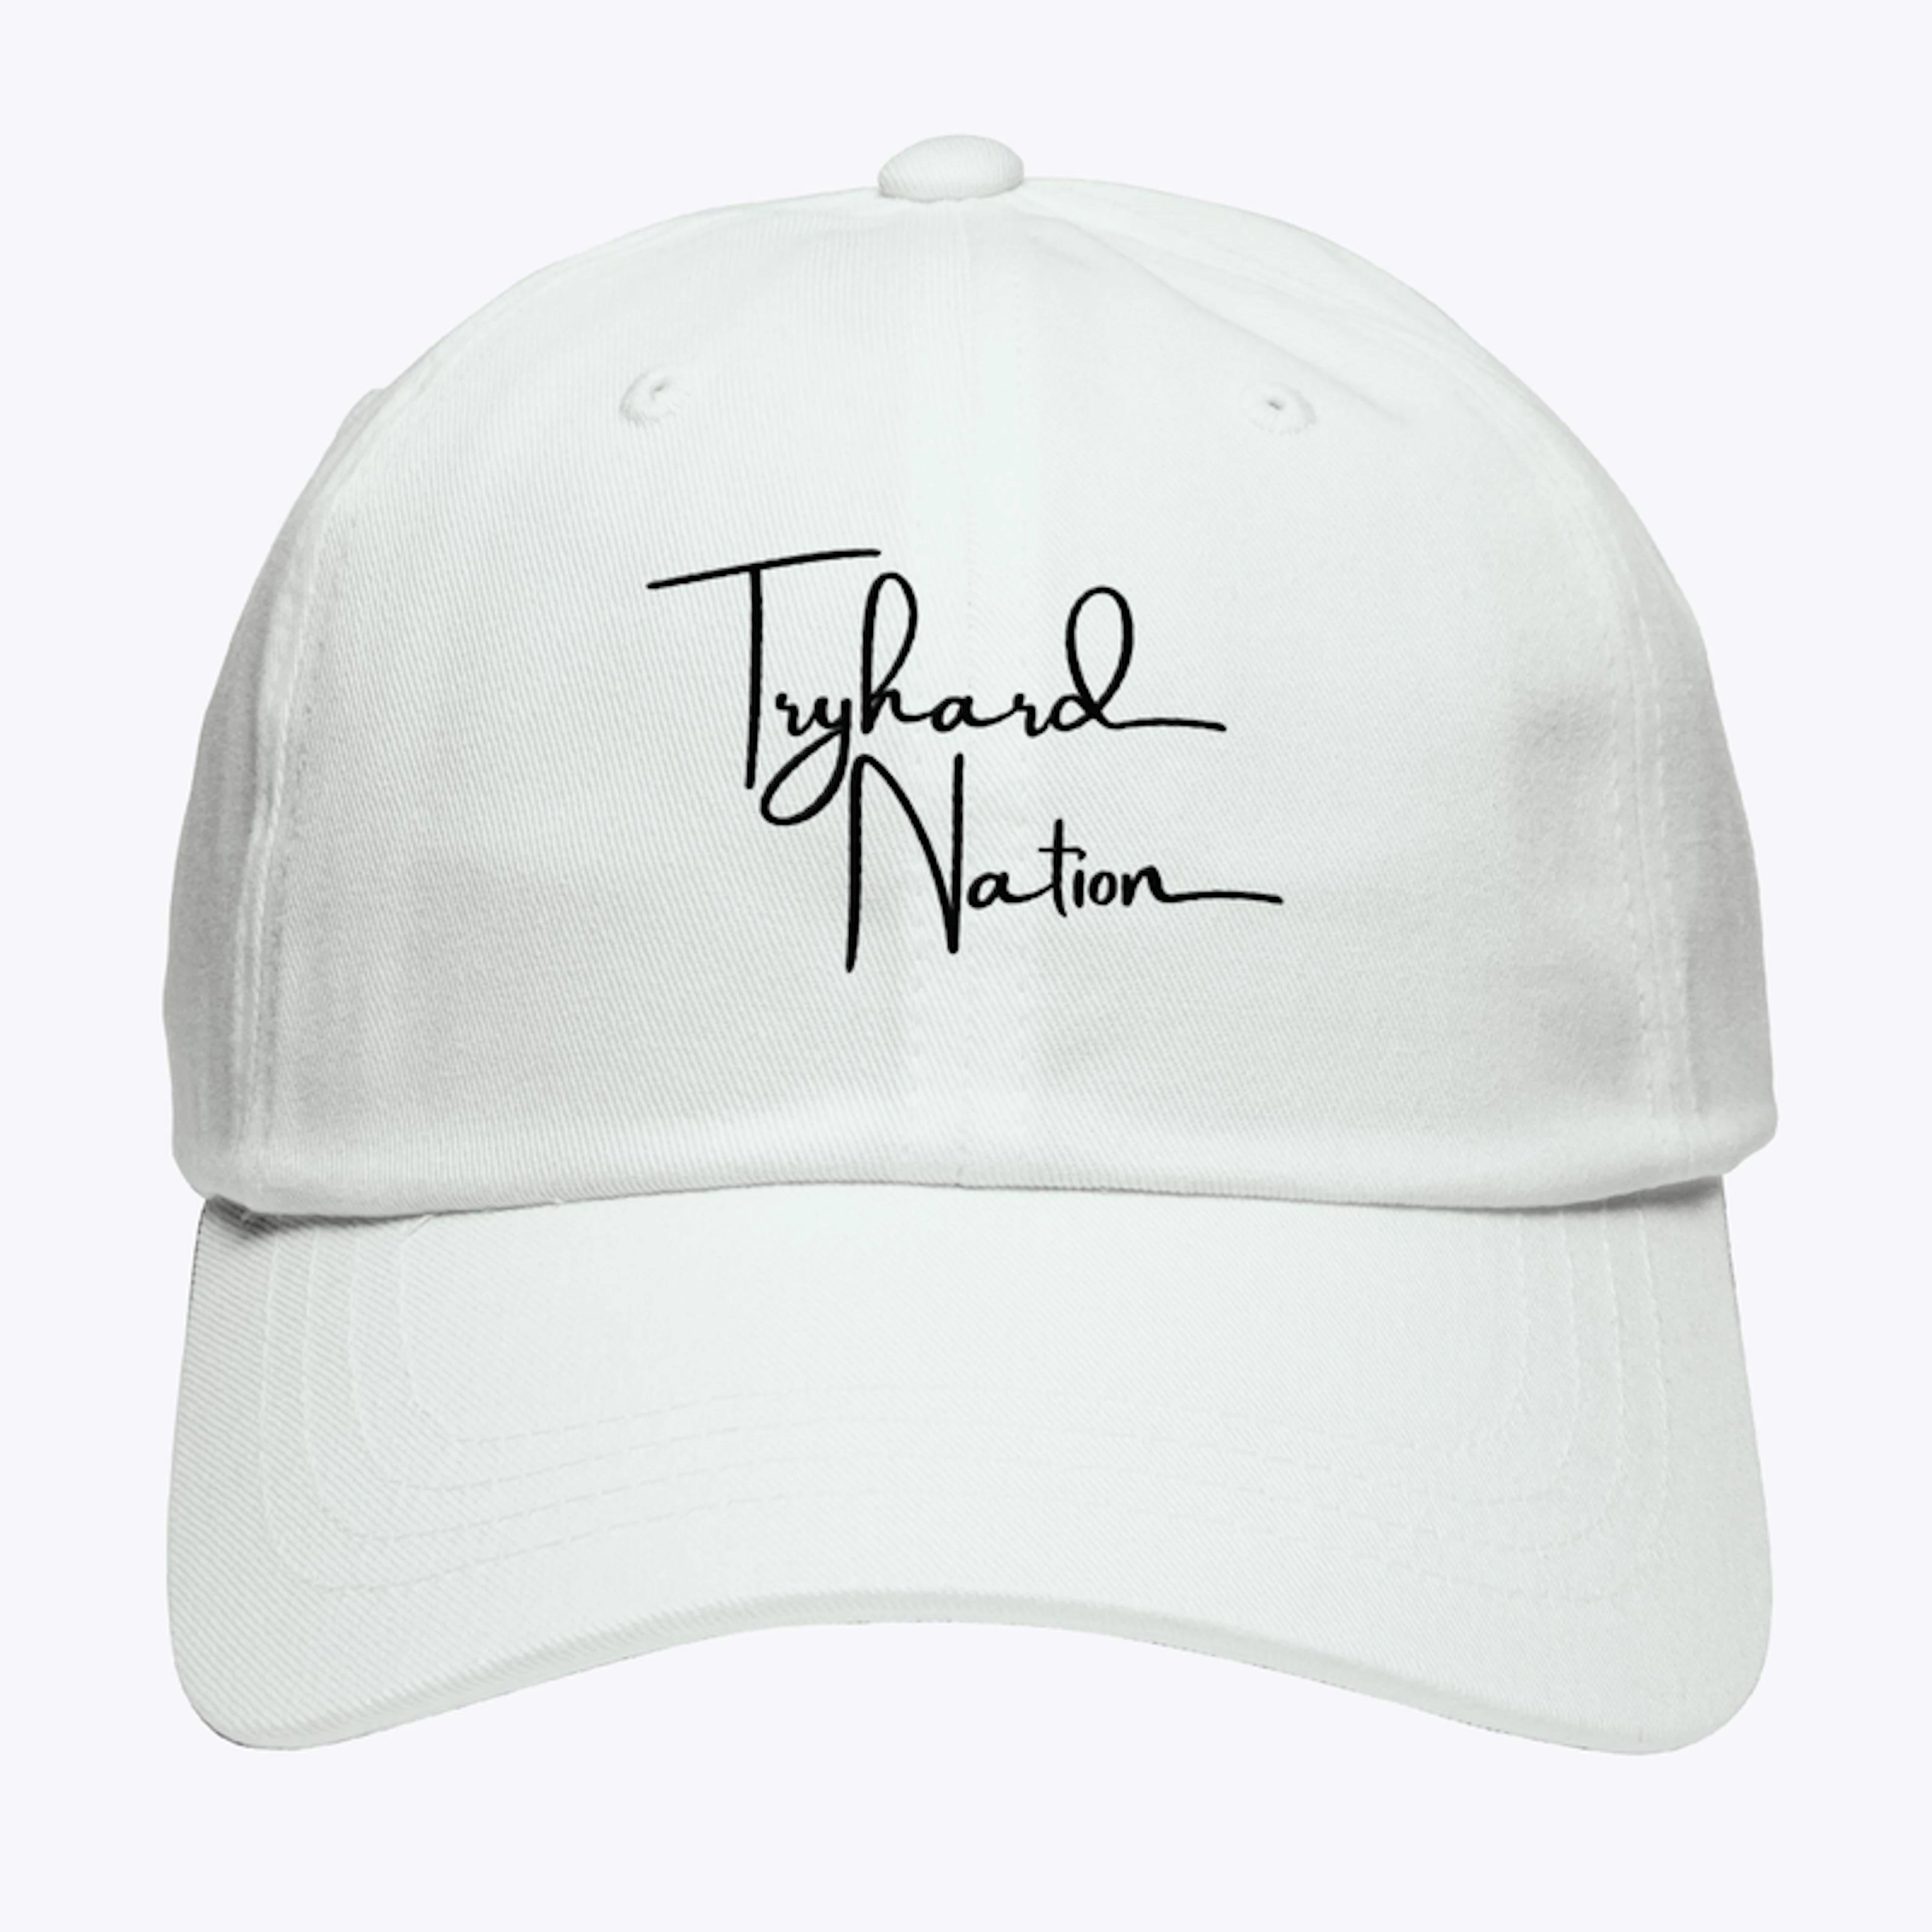 Tryhard Nation Classic Hat